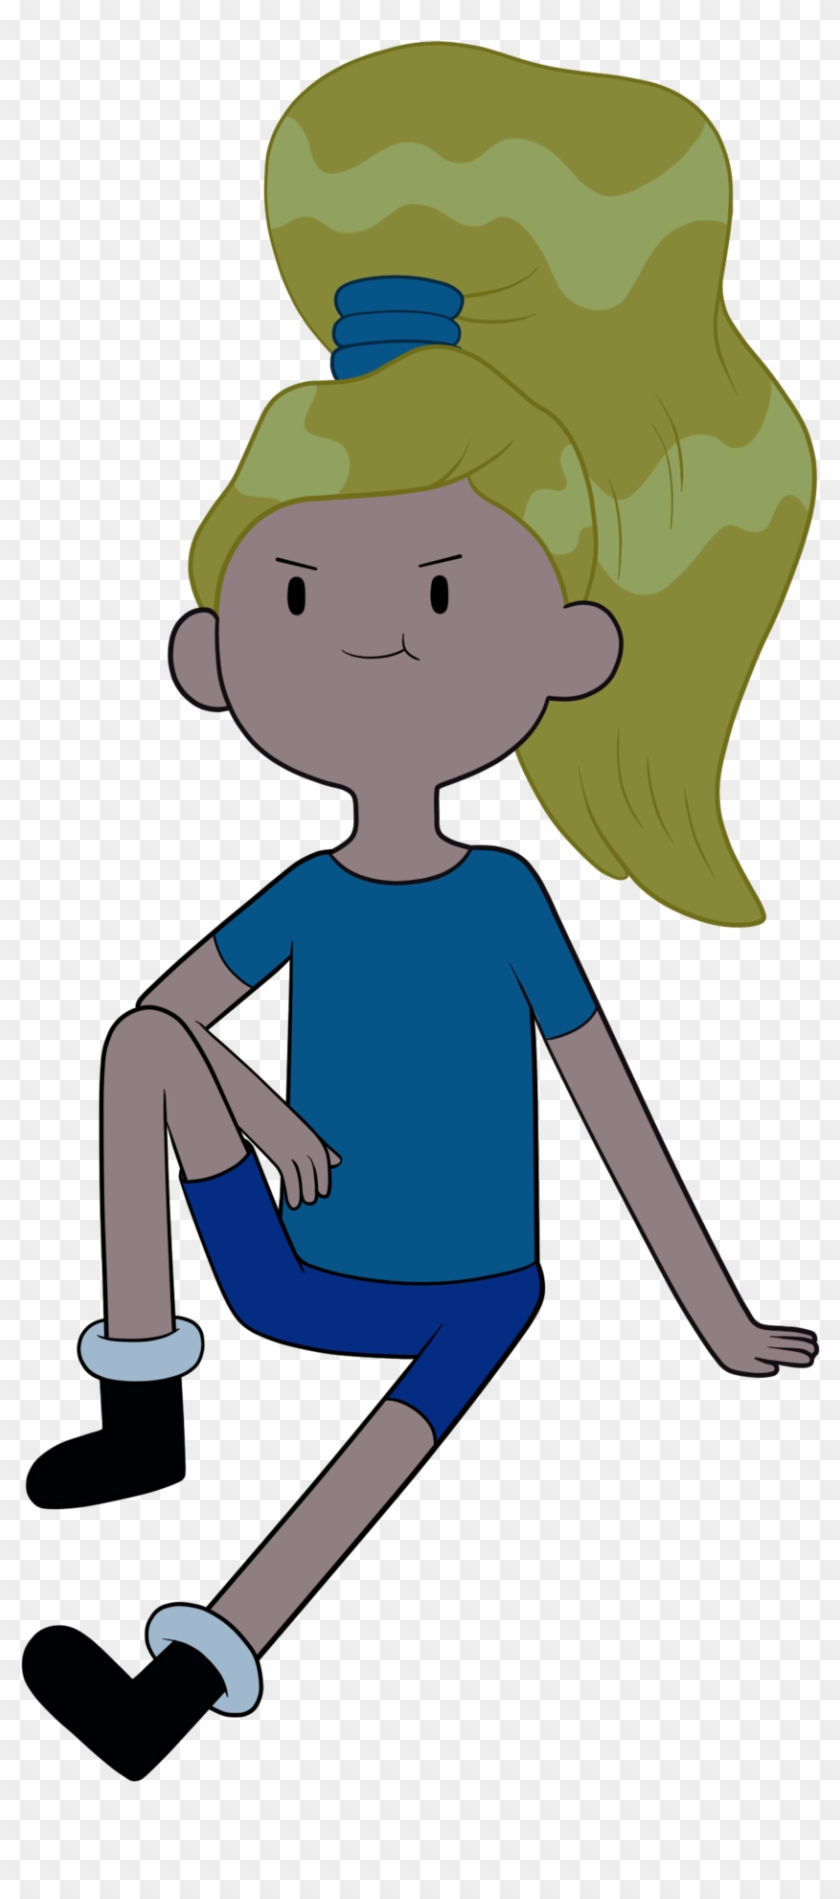 Finn By Thecheeseburger Finn By Thecheeseburger Adventure Time Finn S Hair Free Transparent Png Clipart Images Download